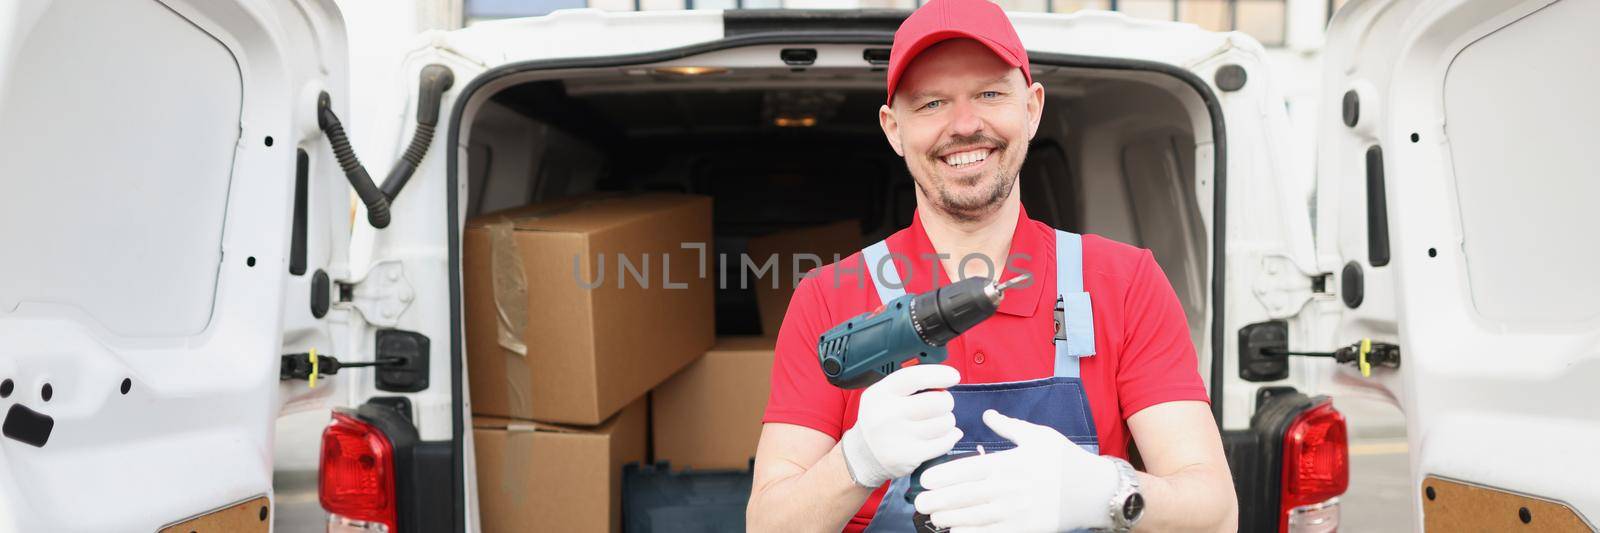 Smiling worker hold screwdriver device in hand in front of truck full of boxes by kuprevich